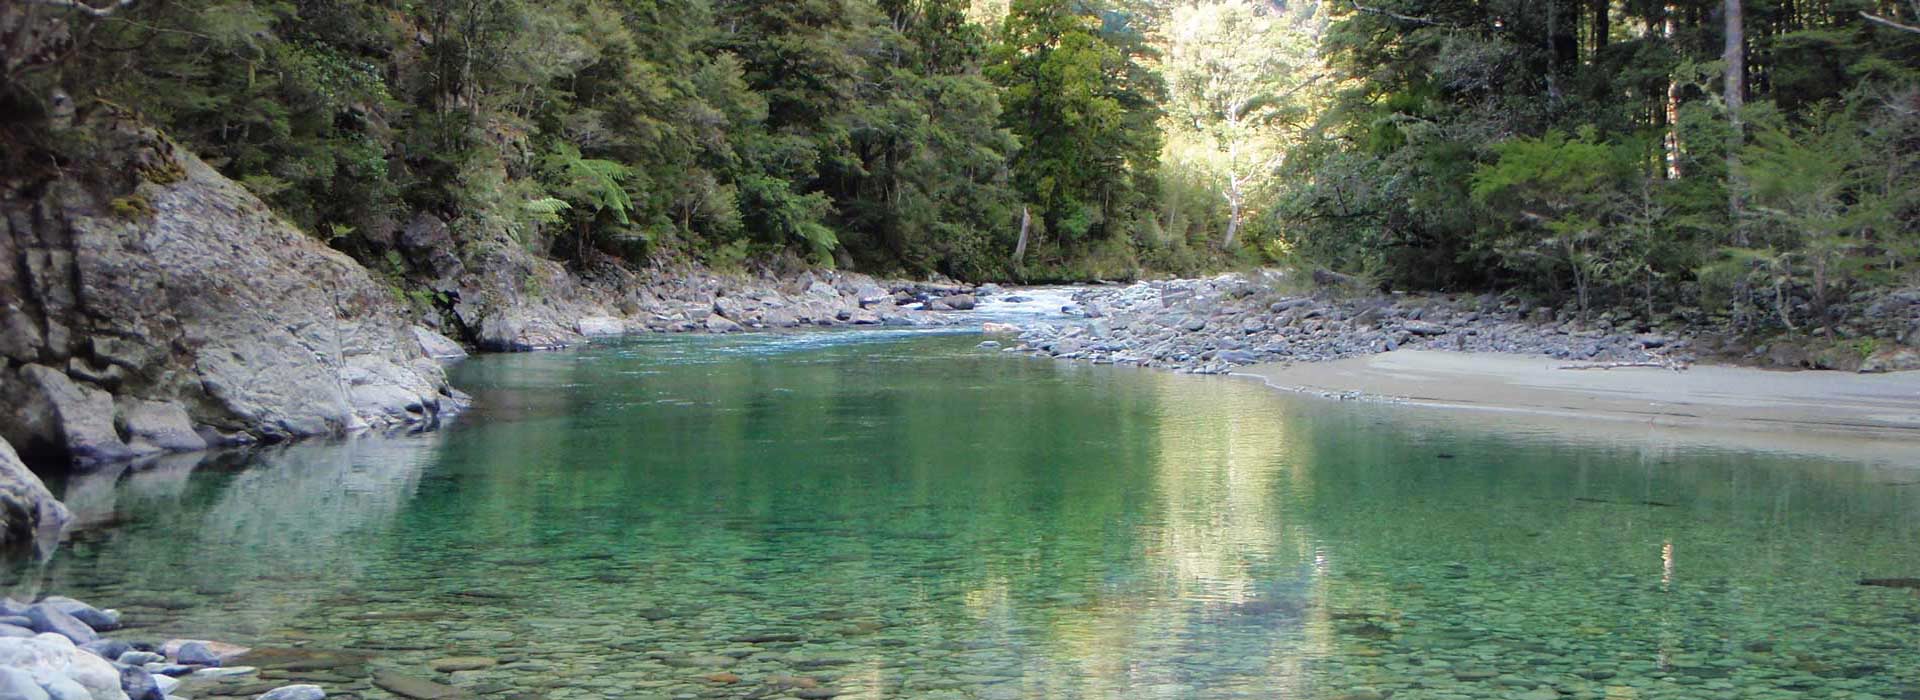 Fly fishing in Nelson and Tasman at the top of New Zealand's South Island